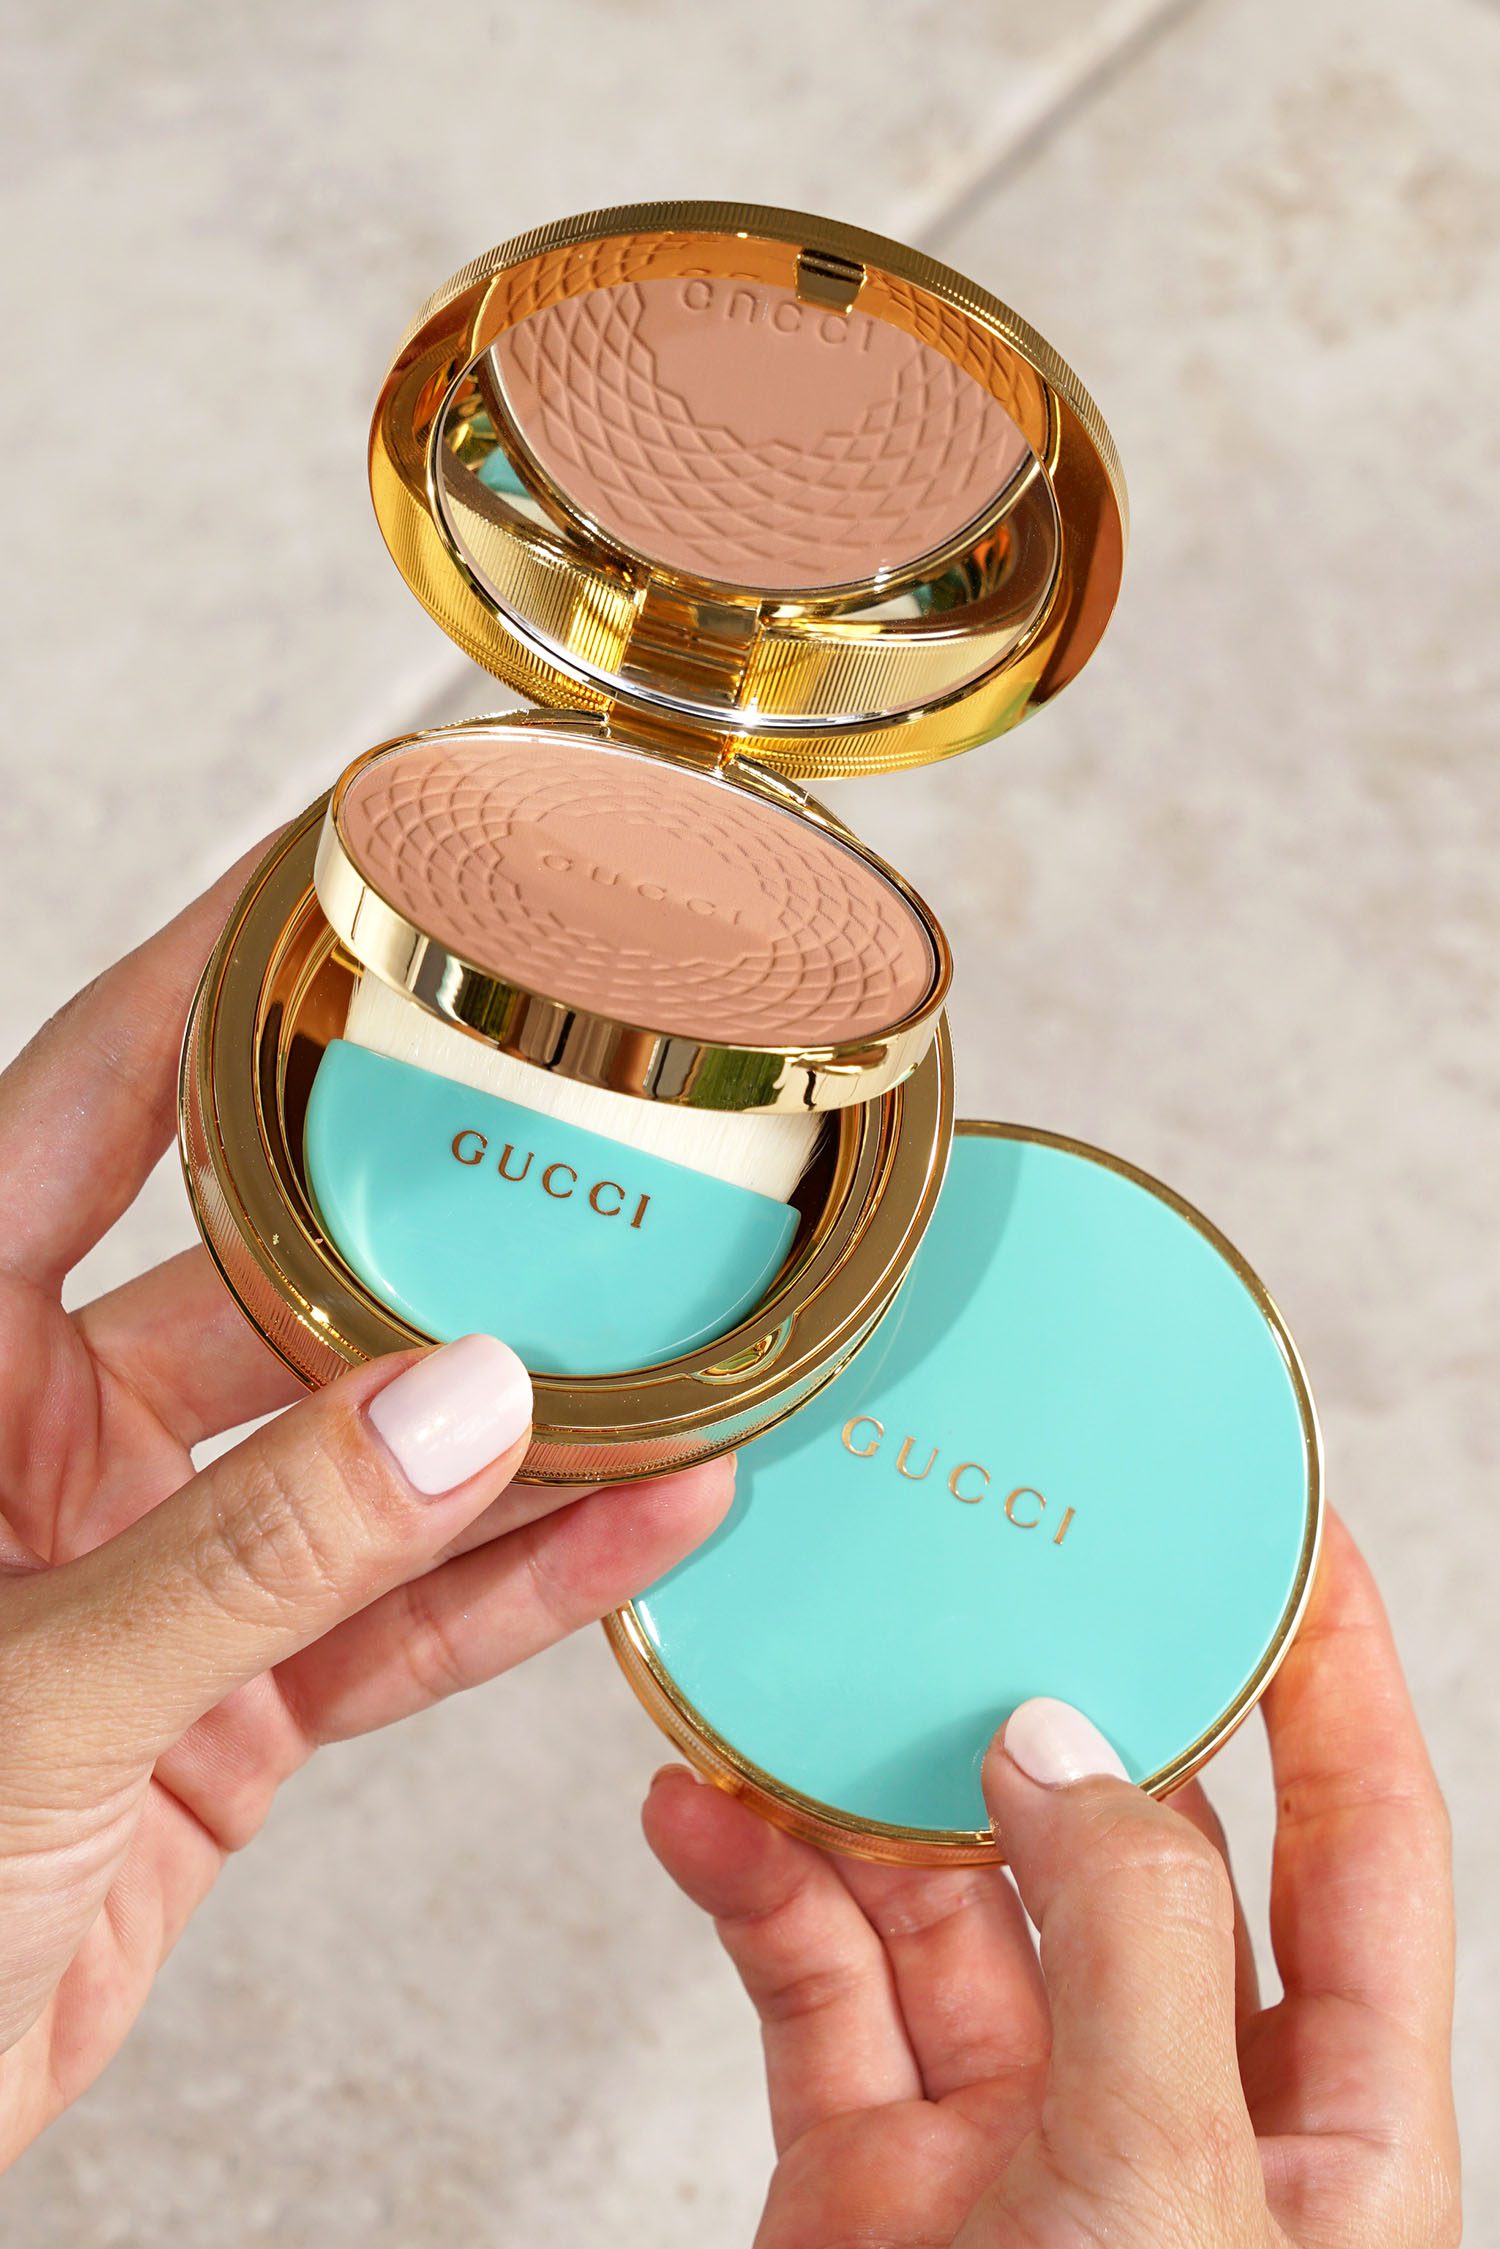 justering Stejl bitter Gucci Eclat Soleil Bronzing Powder Review - The Beauty Look Book